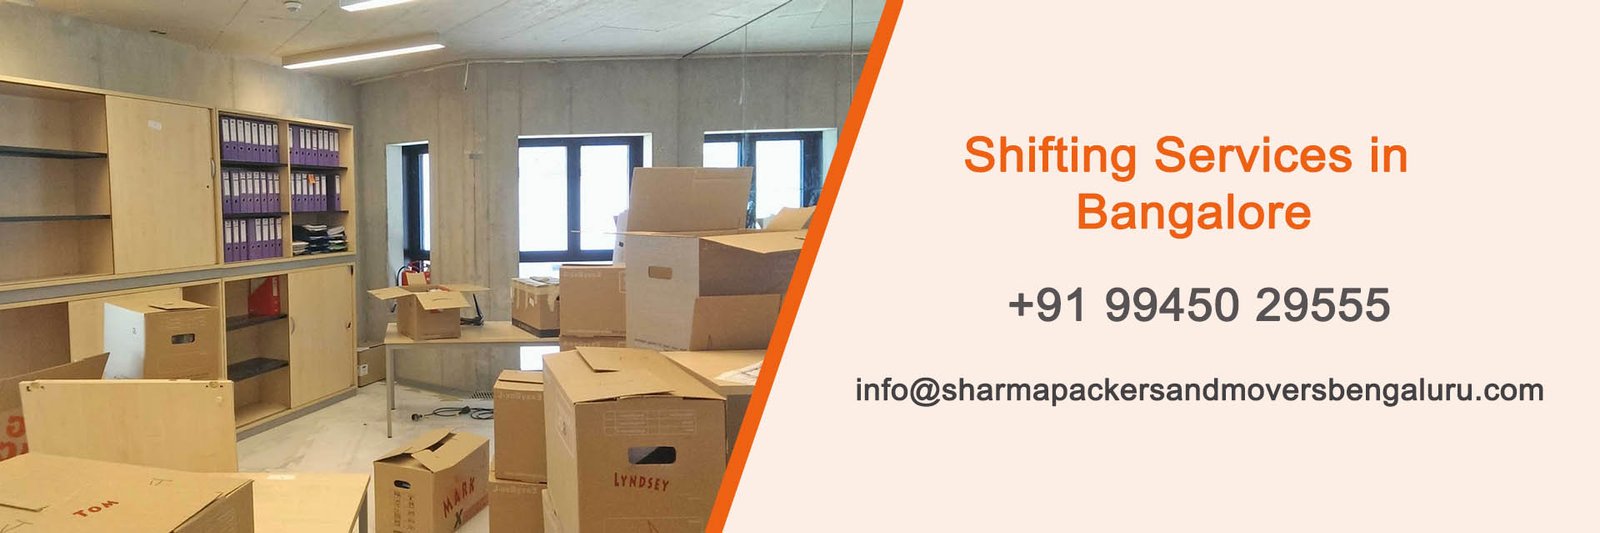 Shifting Services in Bangalore